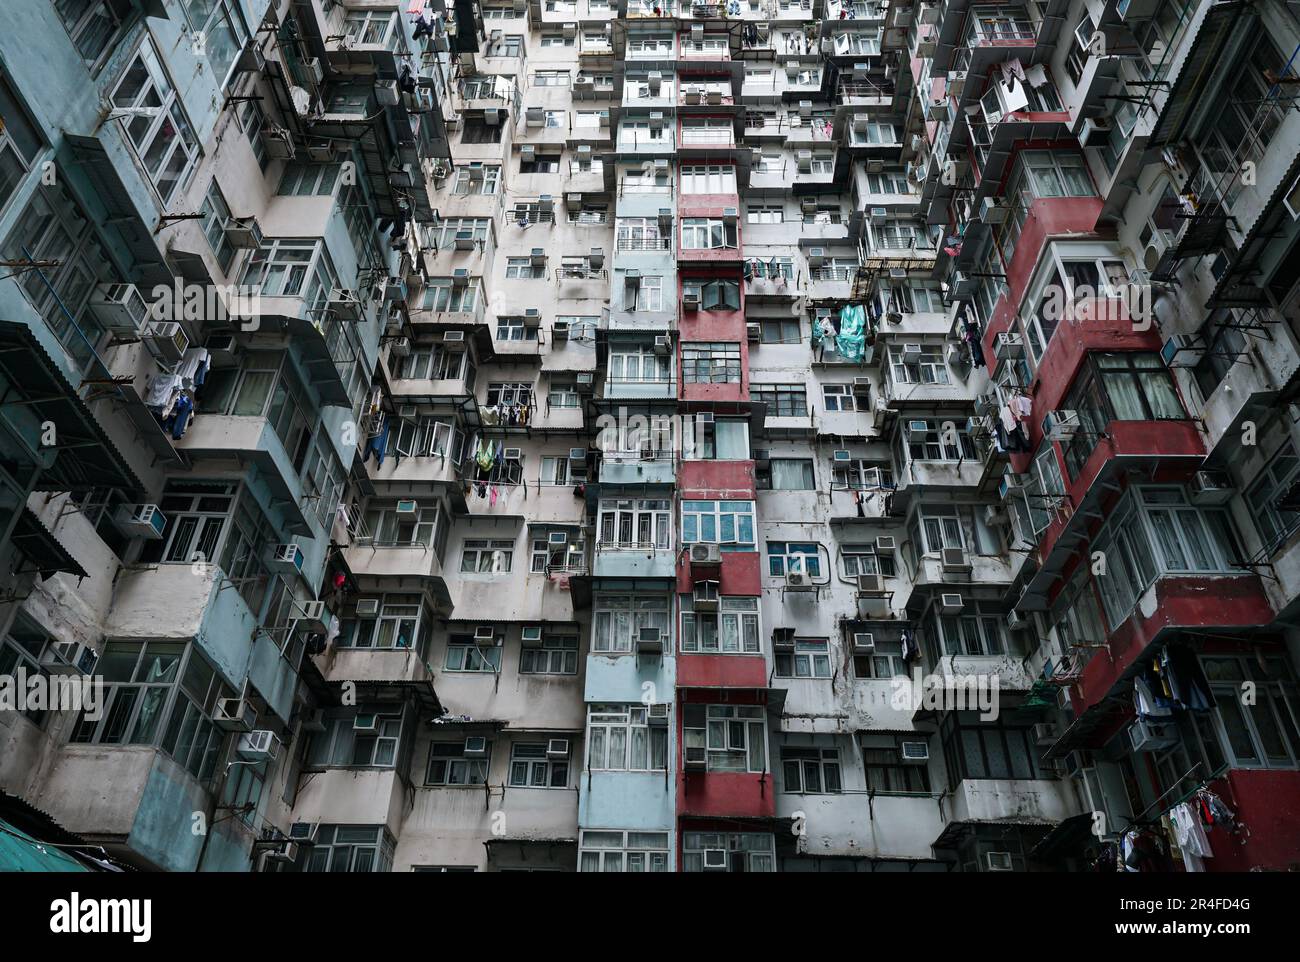 Yick Fat Building, Quarry Bay, Hong Kong. Residential area in old apartment Stock Photo